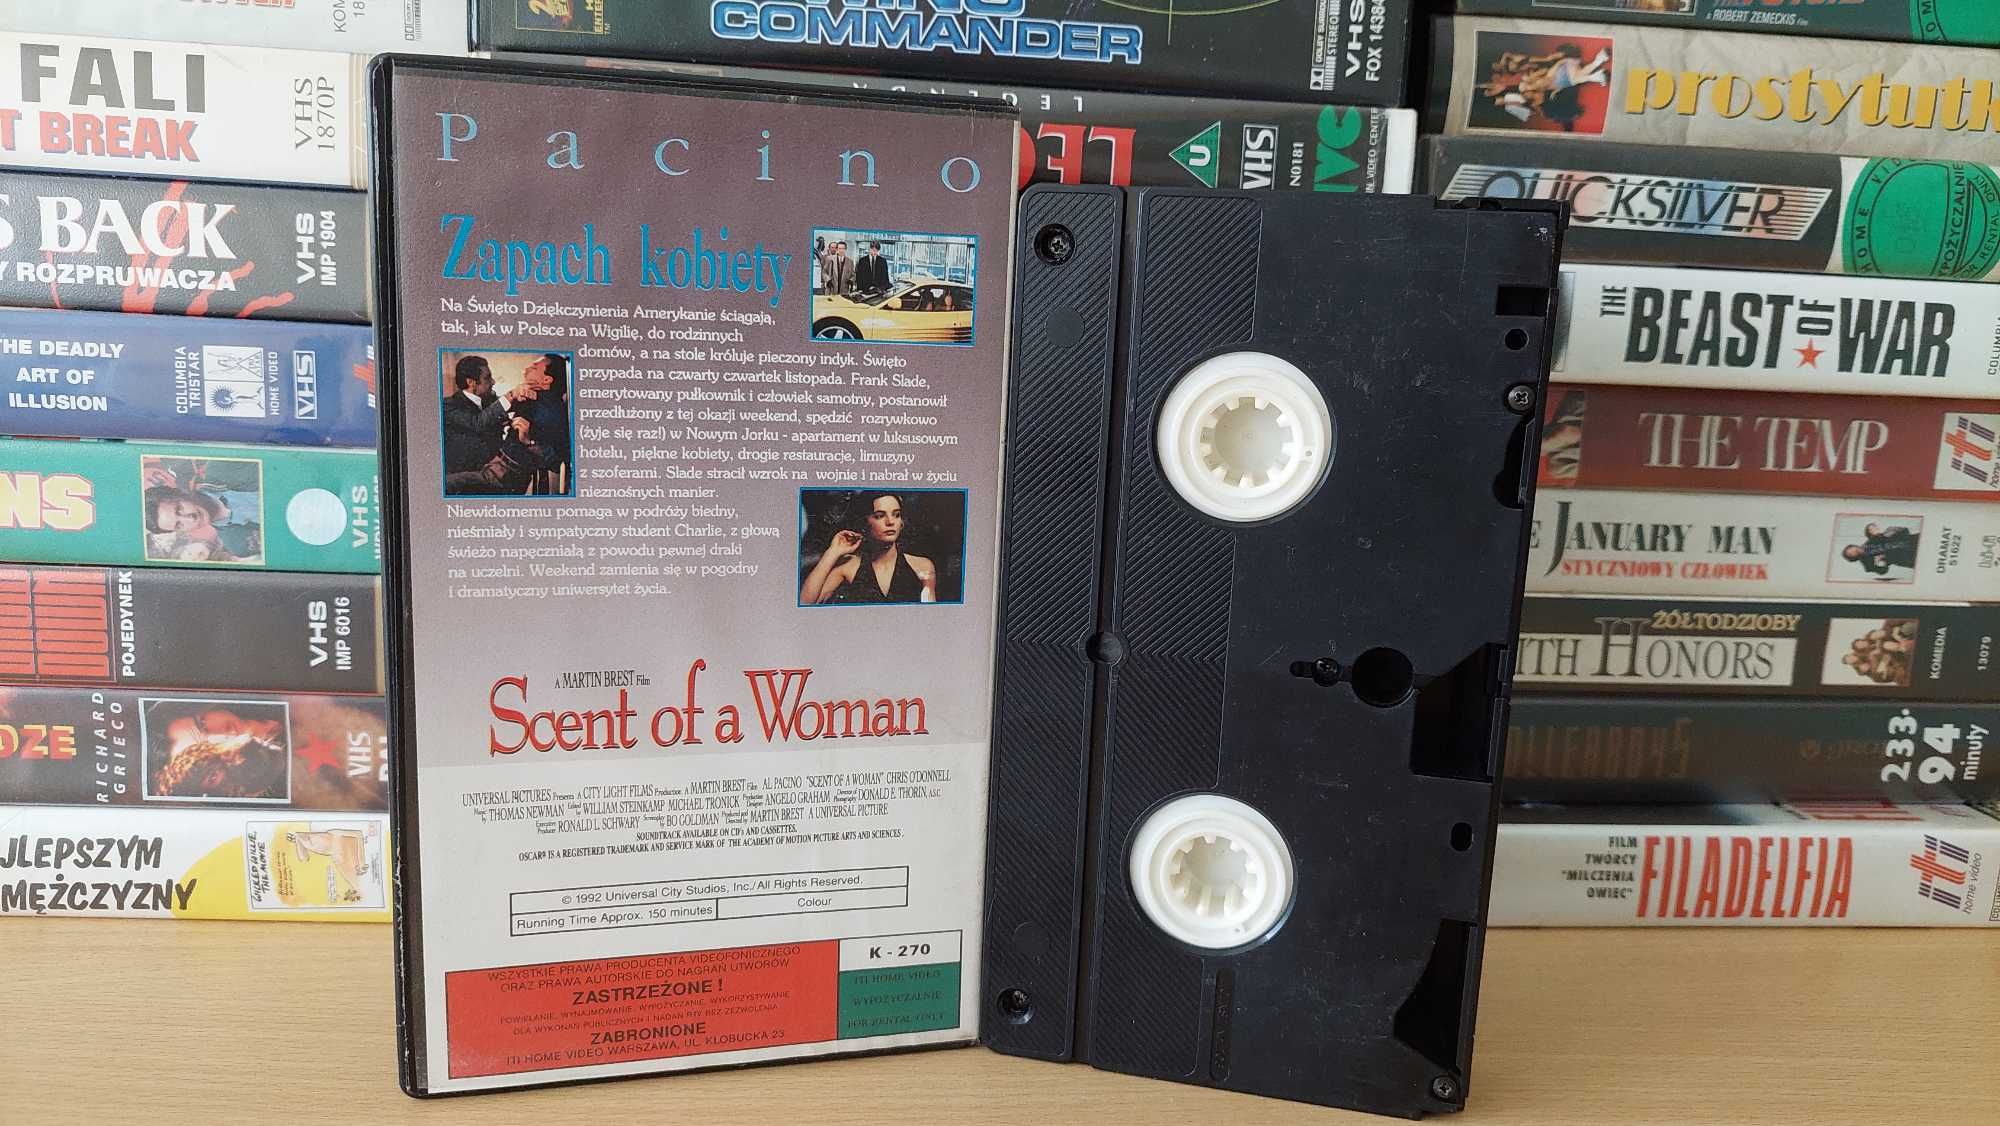 Zapach Kobiety - (Scent of a Woman) - VHS